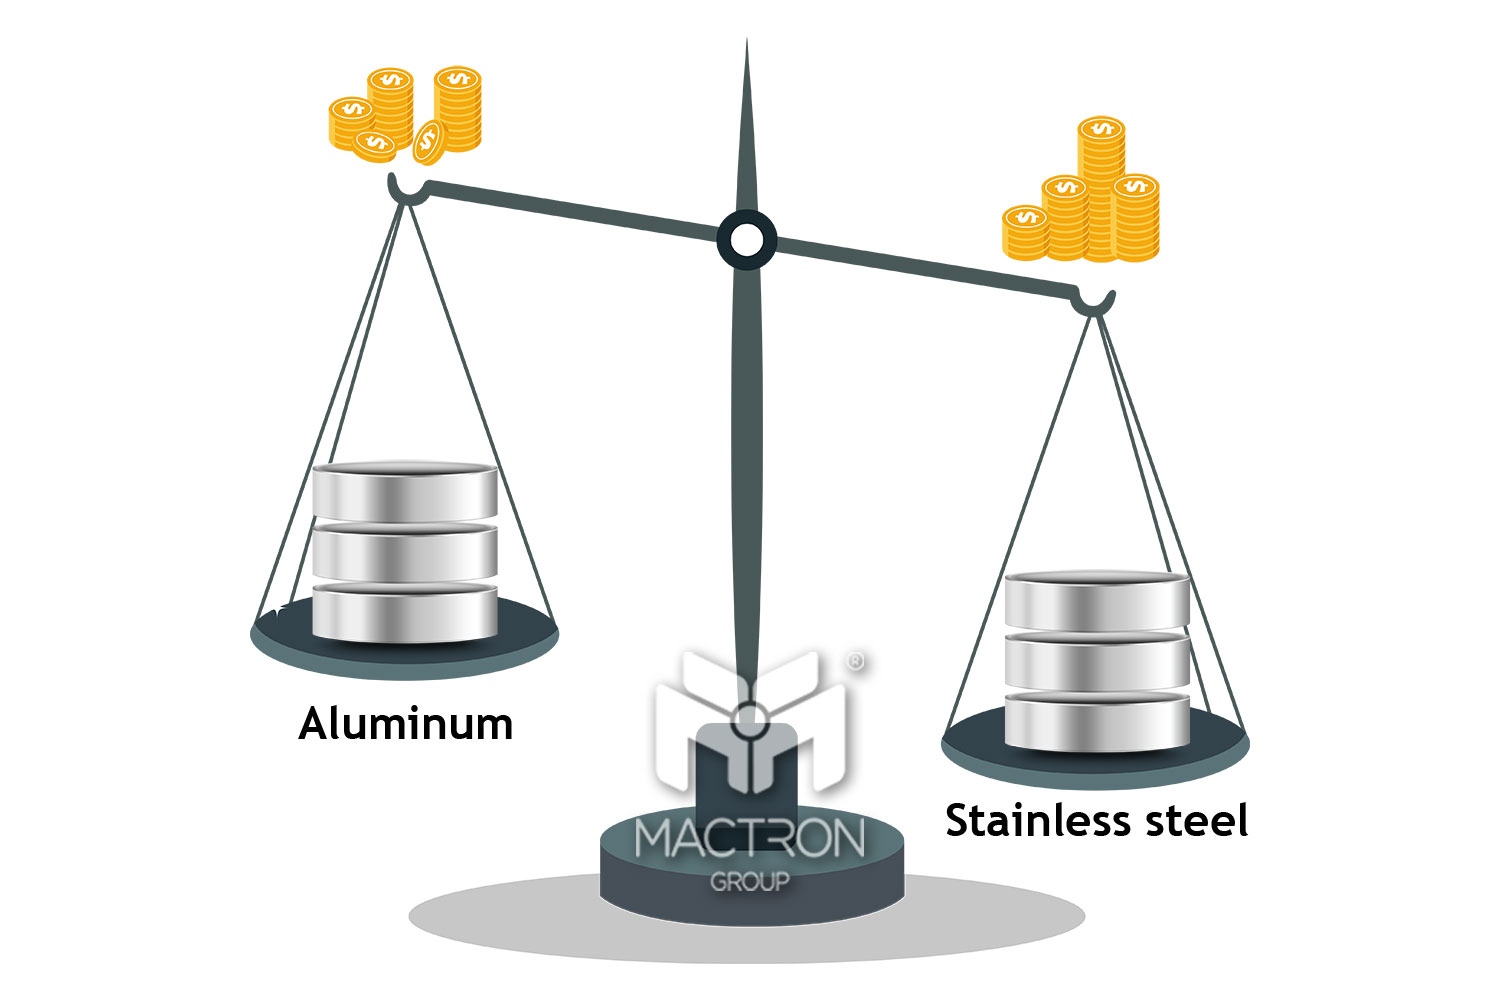 Aluminum is typically cheaper than stainless steel